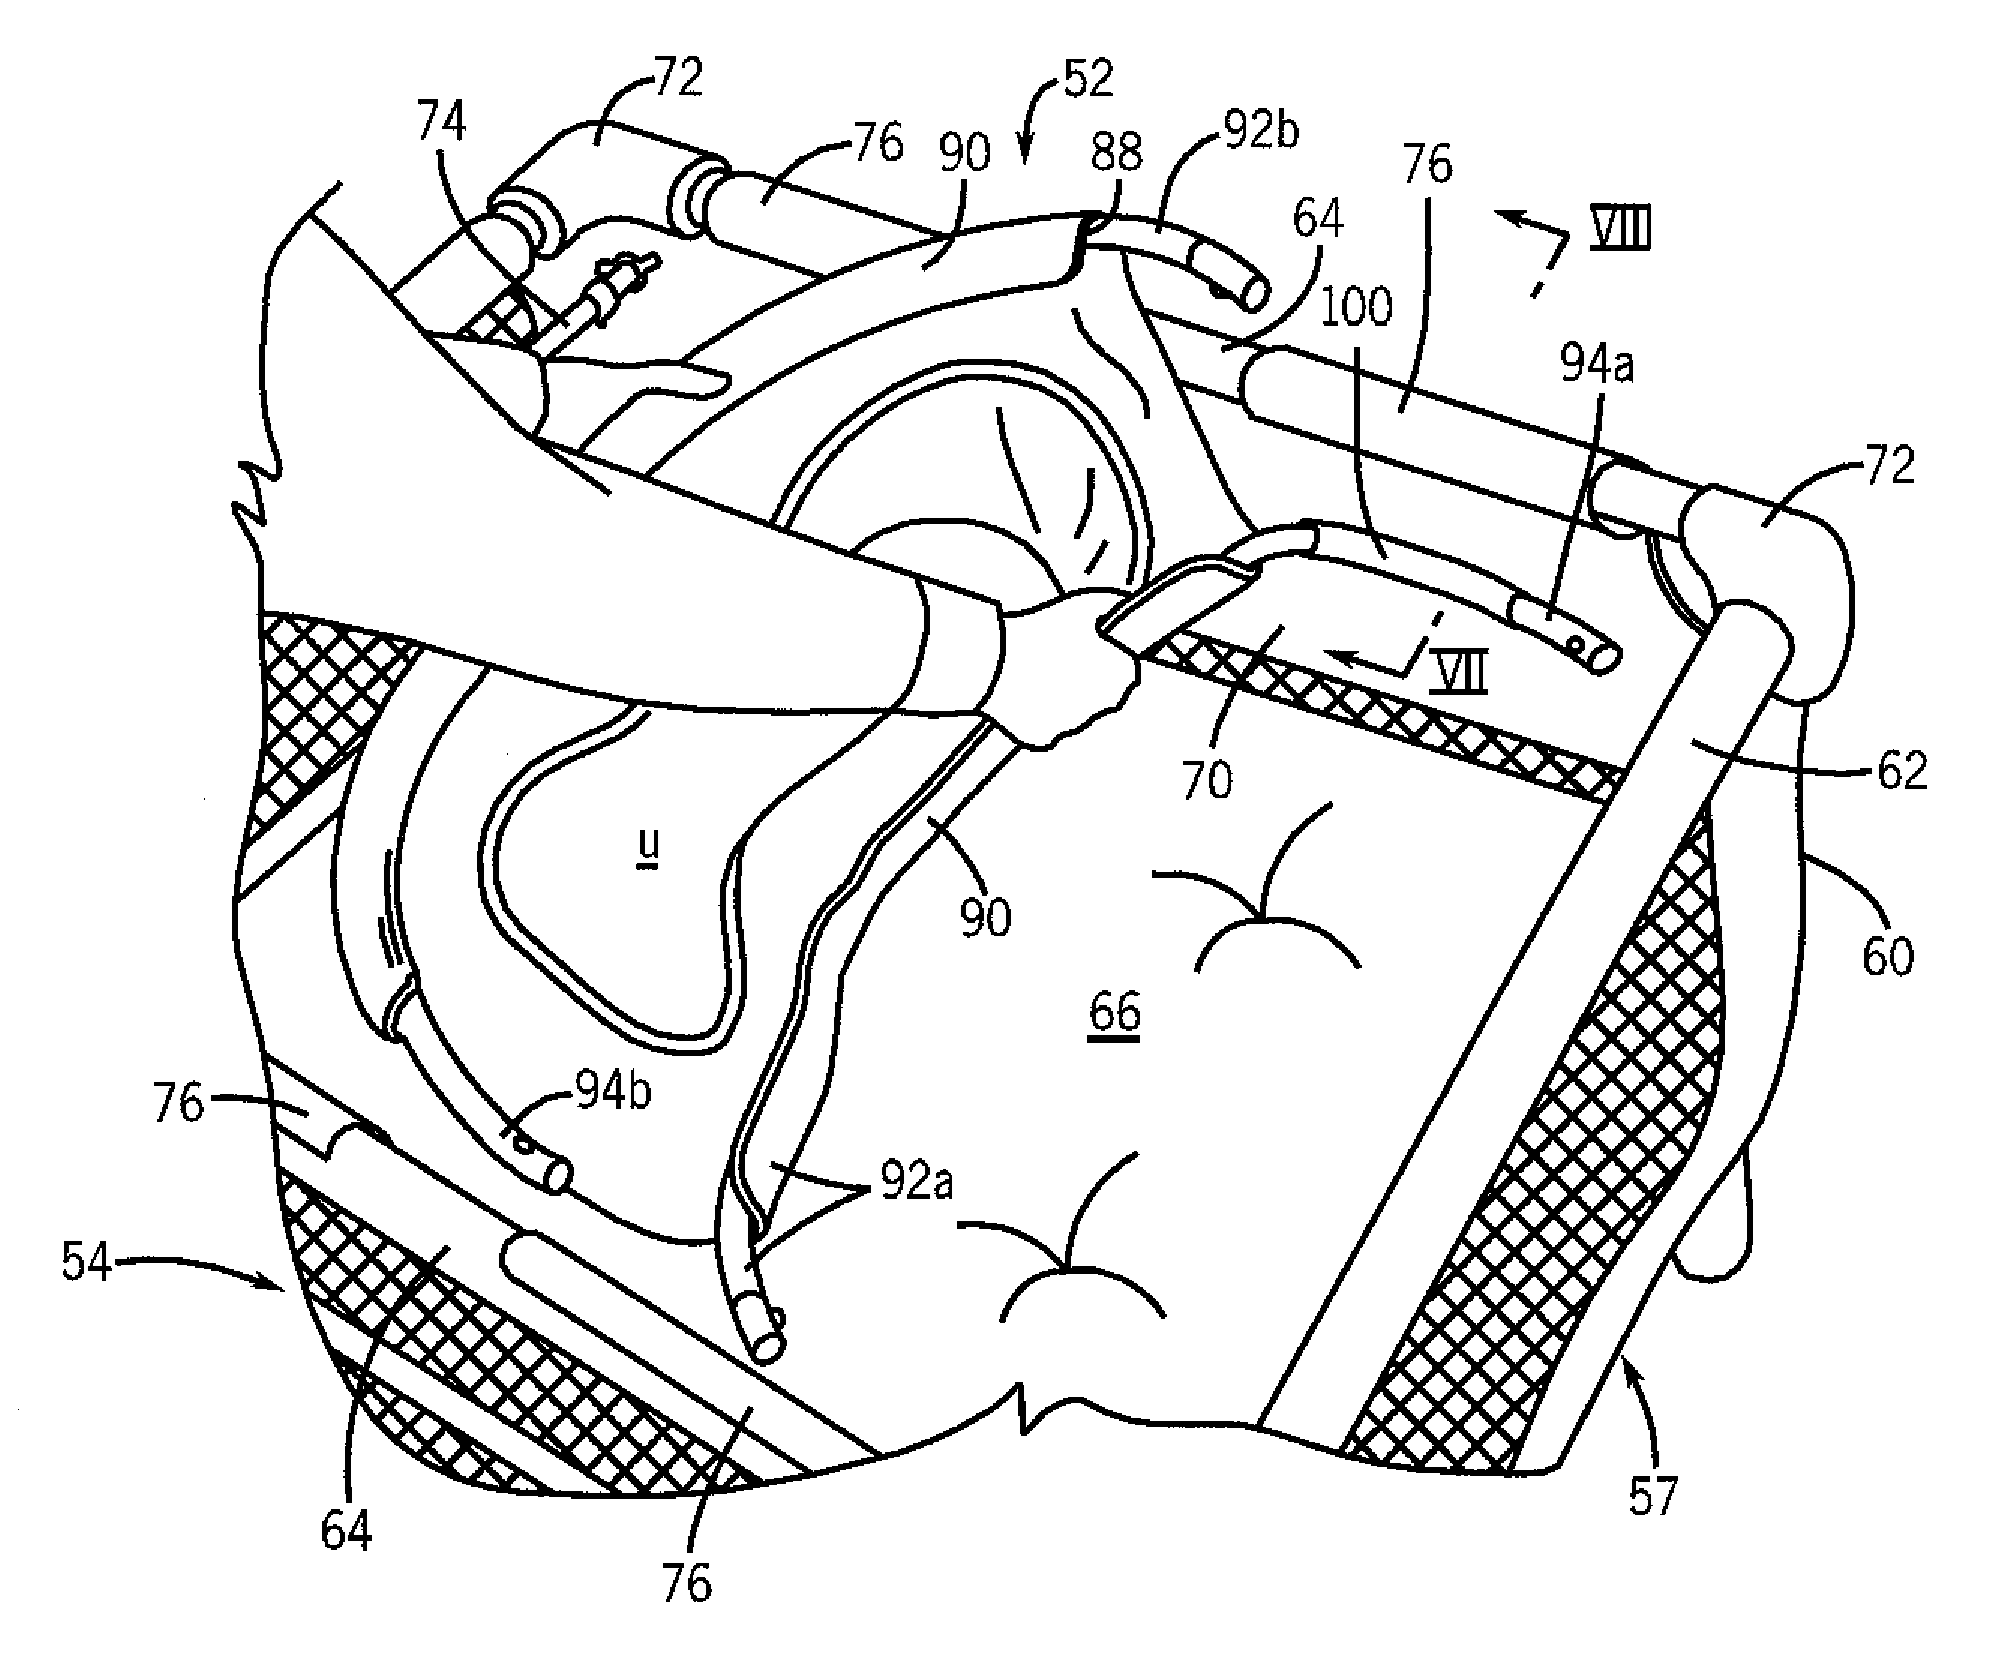 Infant sleeping apparatus and child containment system